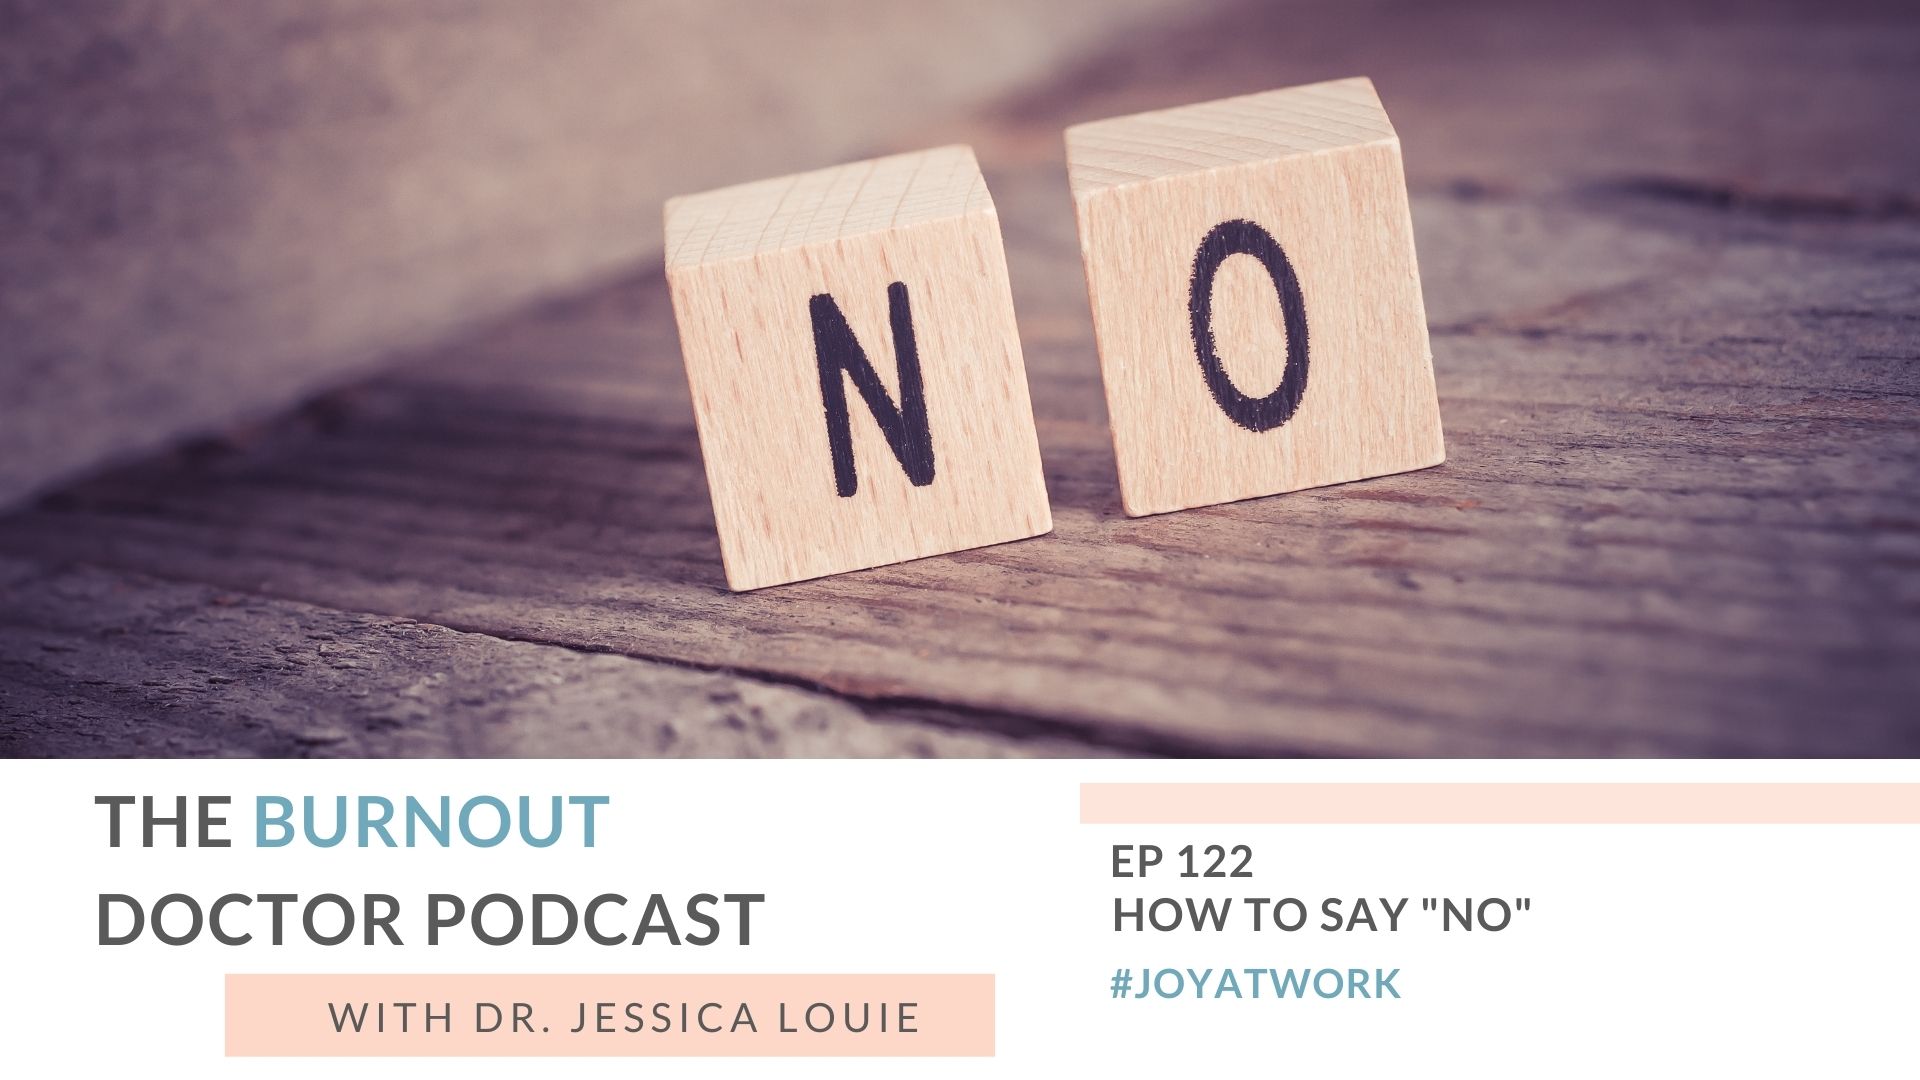 How to say NO with grace and confidence. How to avoid decision fatigue. How to be an action taker decision maker. Mental load and burnout. Mental clutter and burnout. The Burnout Doctor Podcast with Dr. Jessica Louie